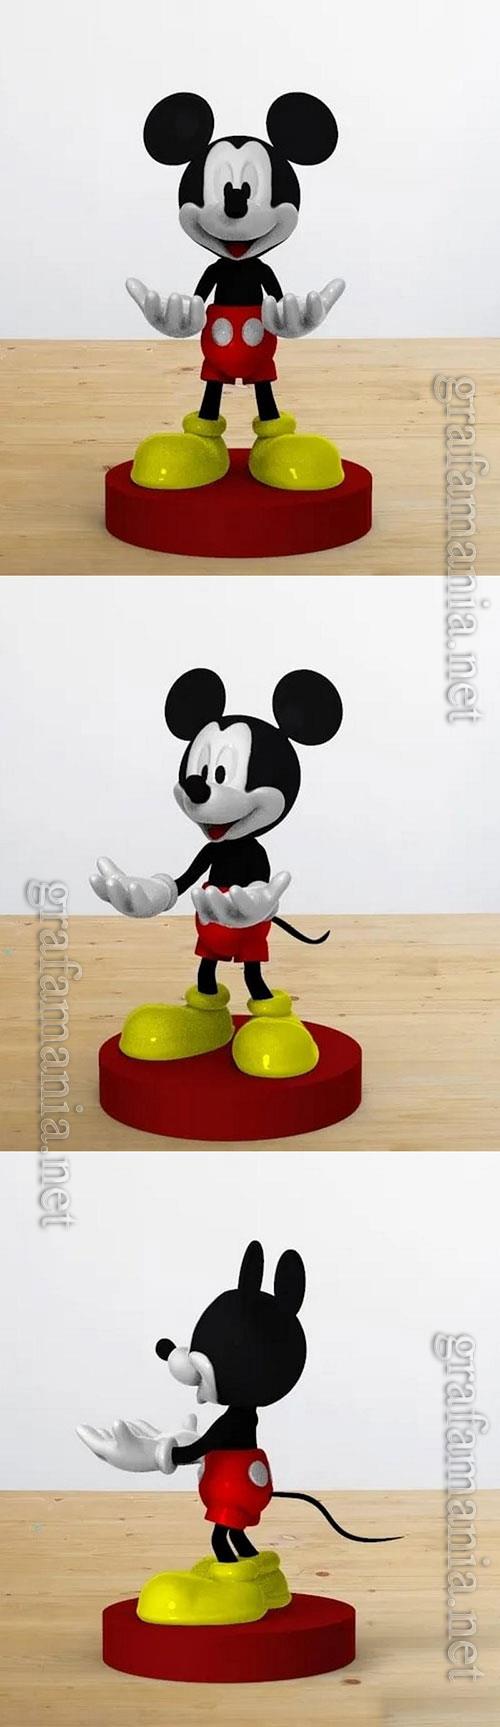 3D Print Model Smartphone Stand Mickey Mouse